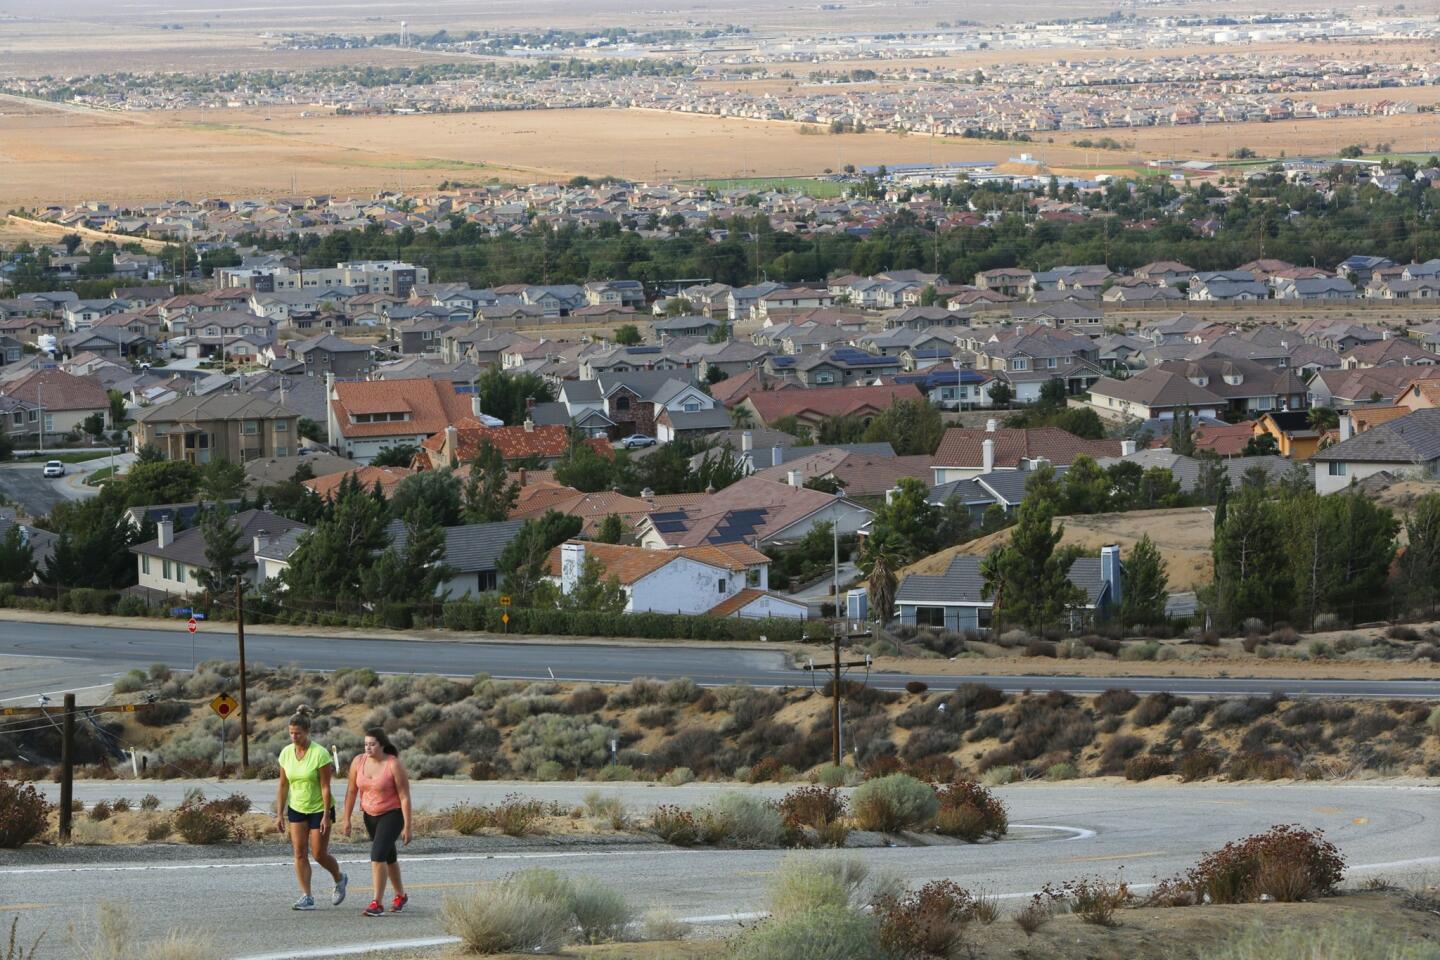 Penny Munz, left, walks with her daughter Stephanie in Palmdale; Lancaster is in the distance. The rift between the two towns has baffled residents, city employees and business interests.